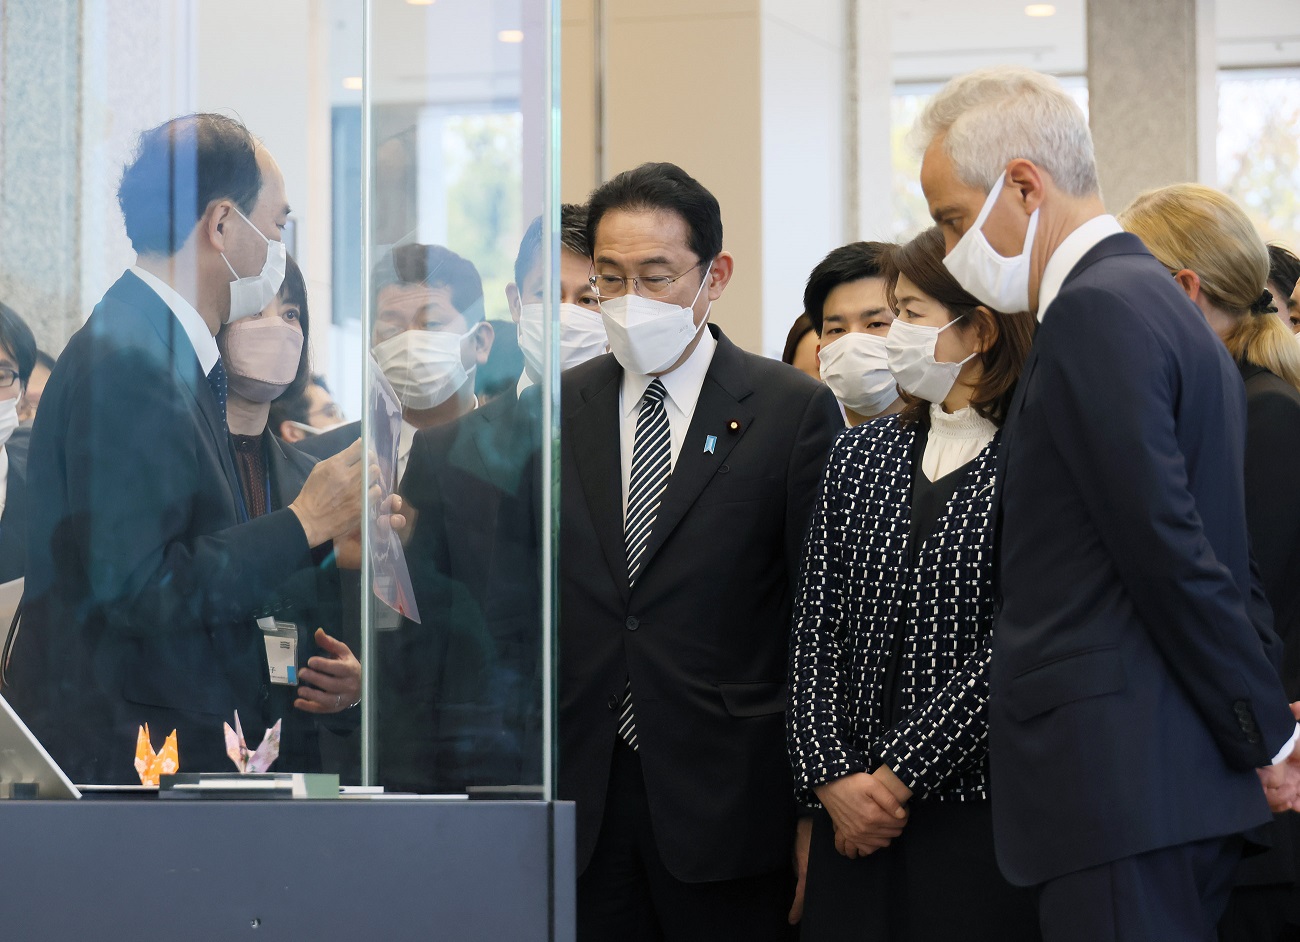 Photograph of the Prime Minister visiting the Hiroshima Peace Memorial Museum